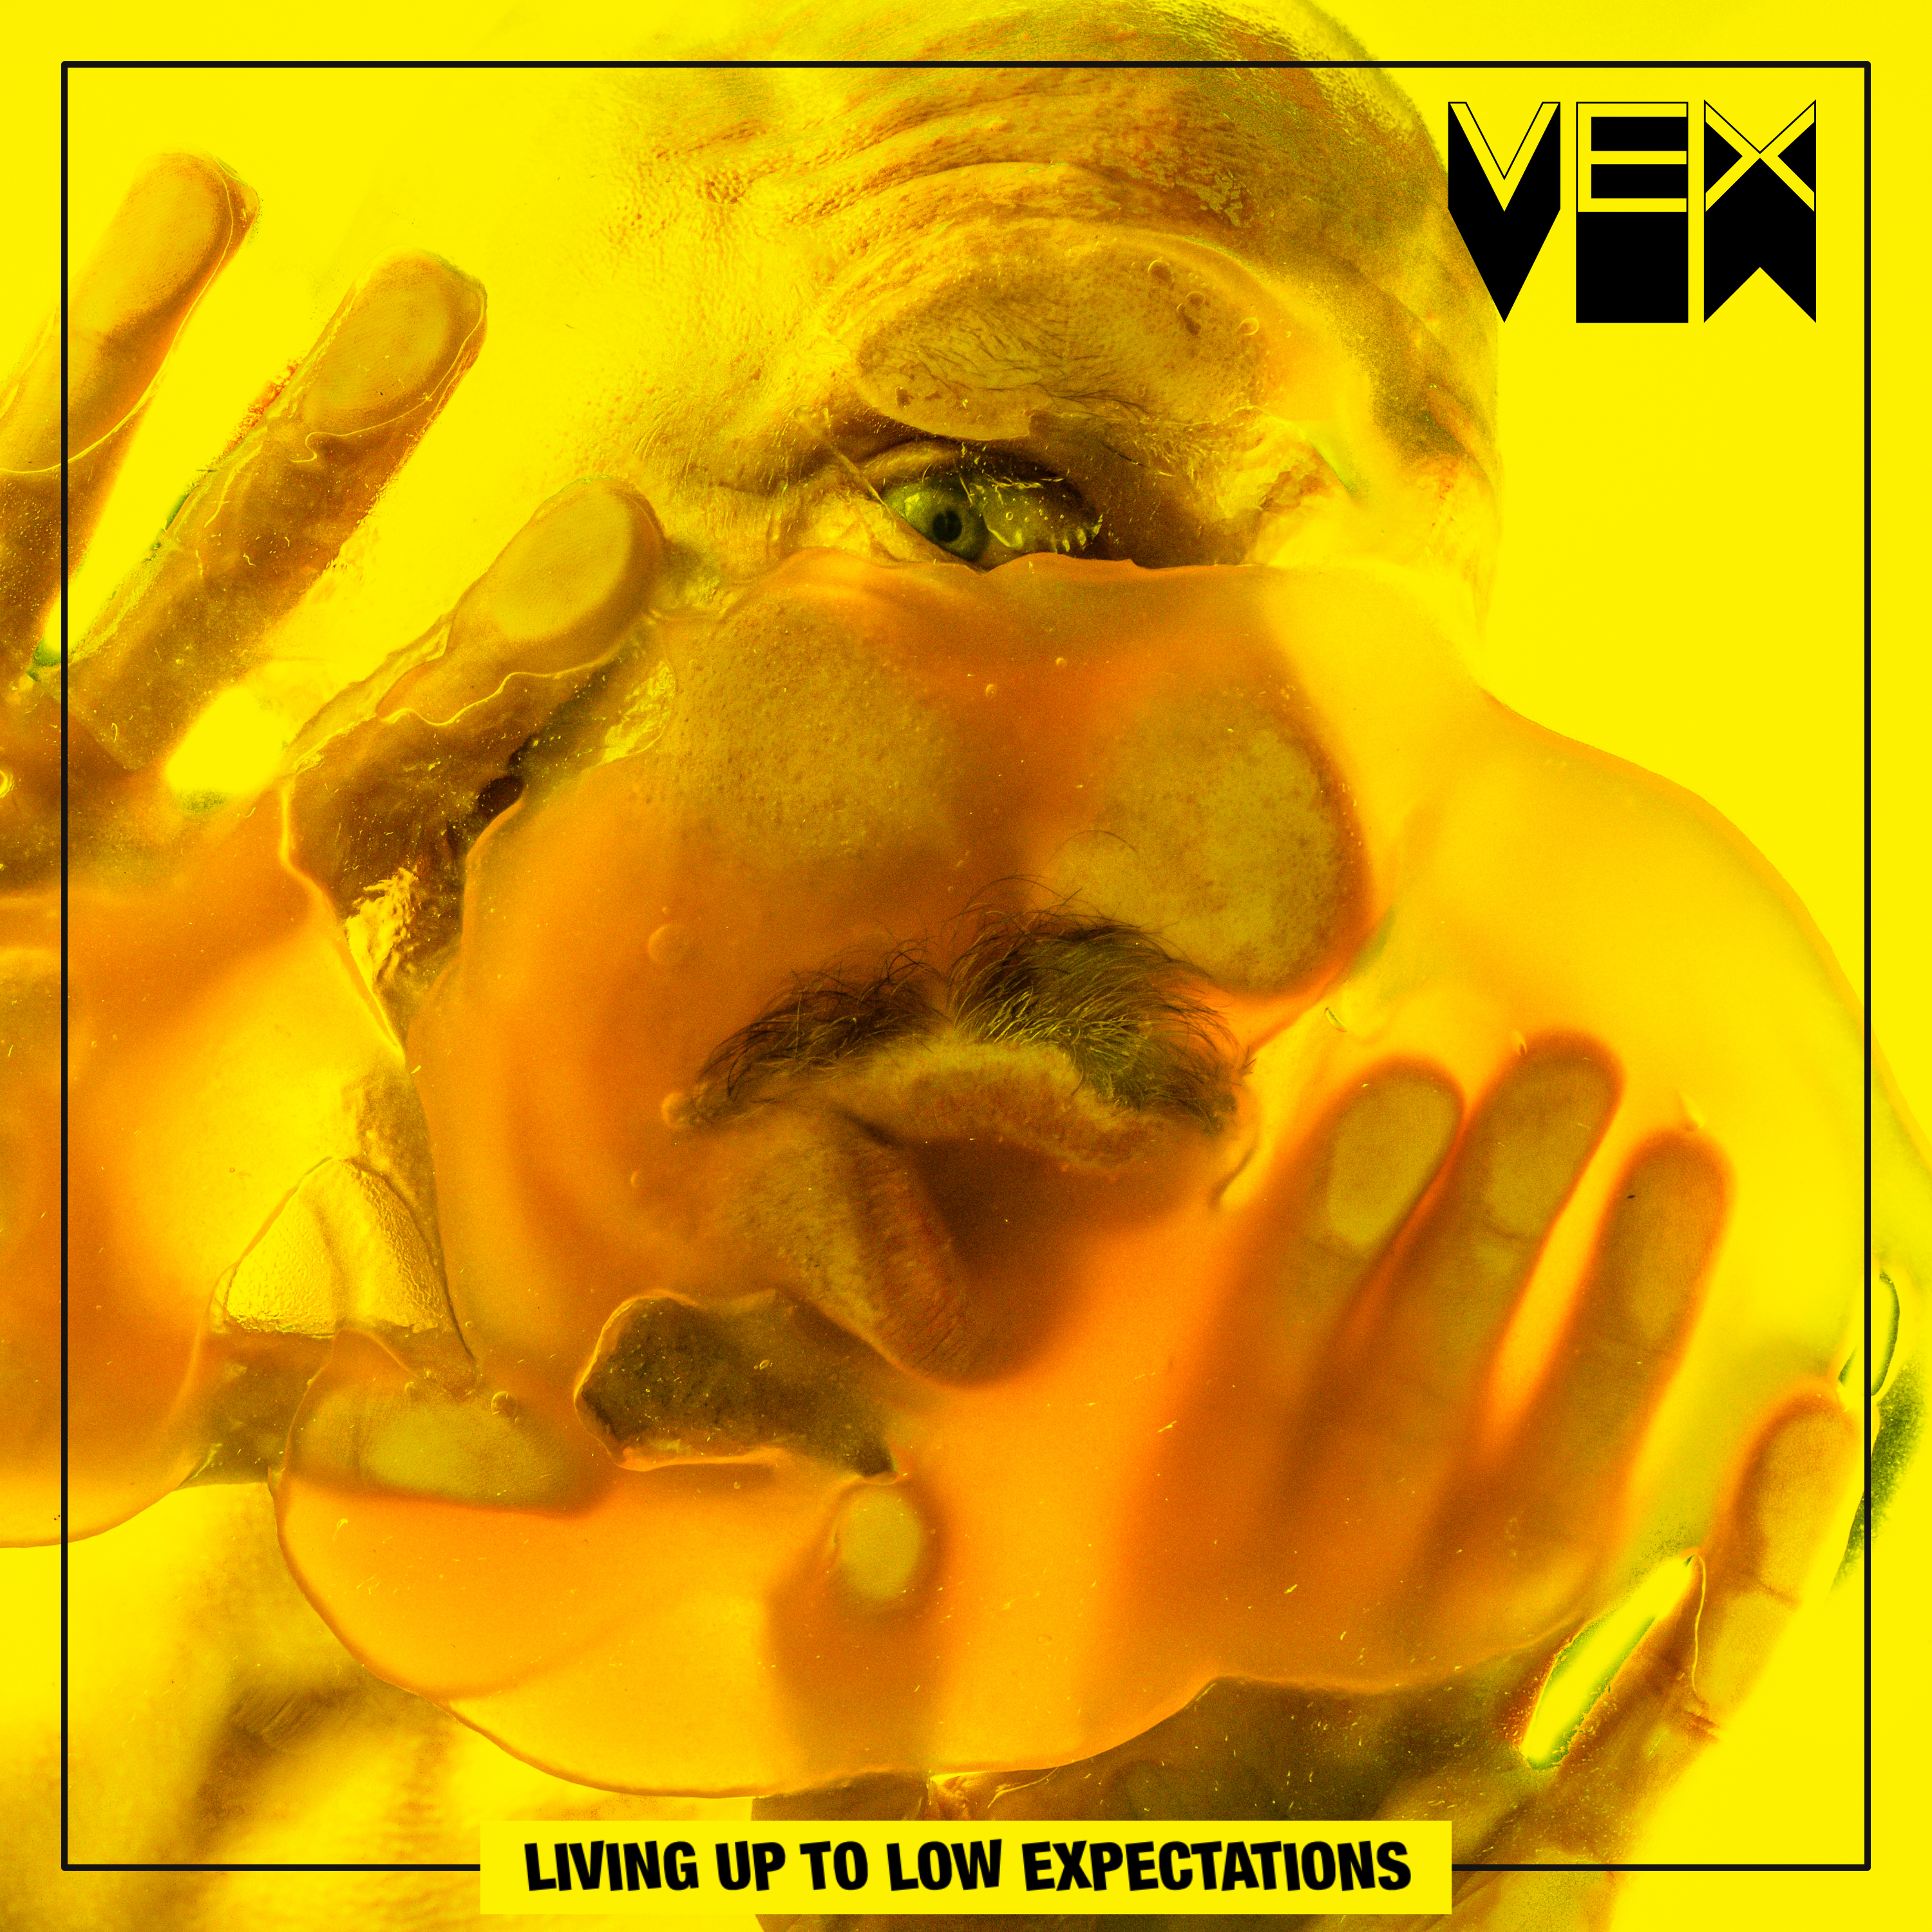 Vex---Living-up-to-low-expectations-digital-cover---3000x3000